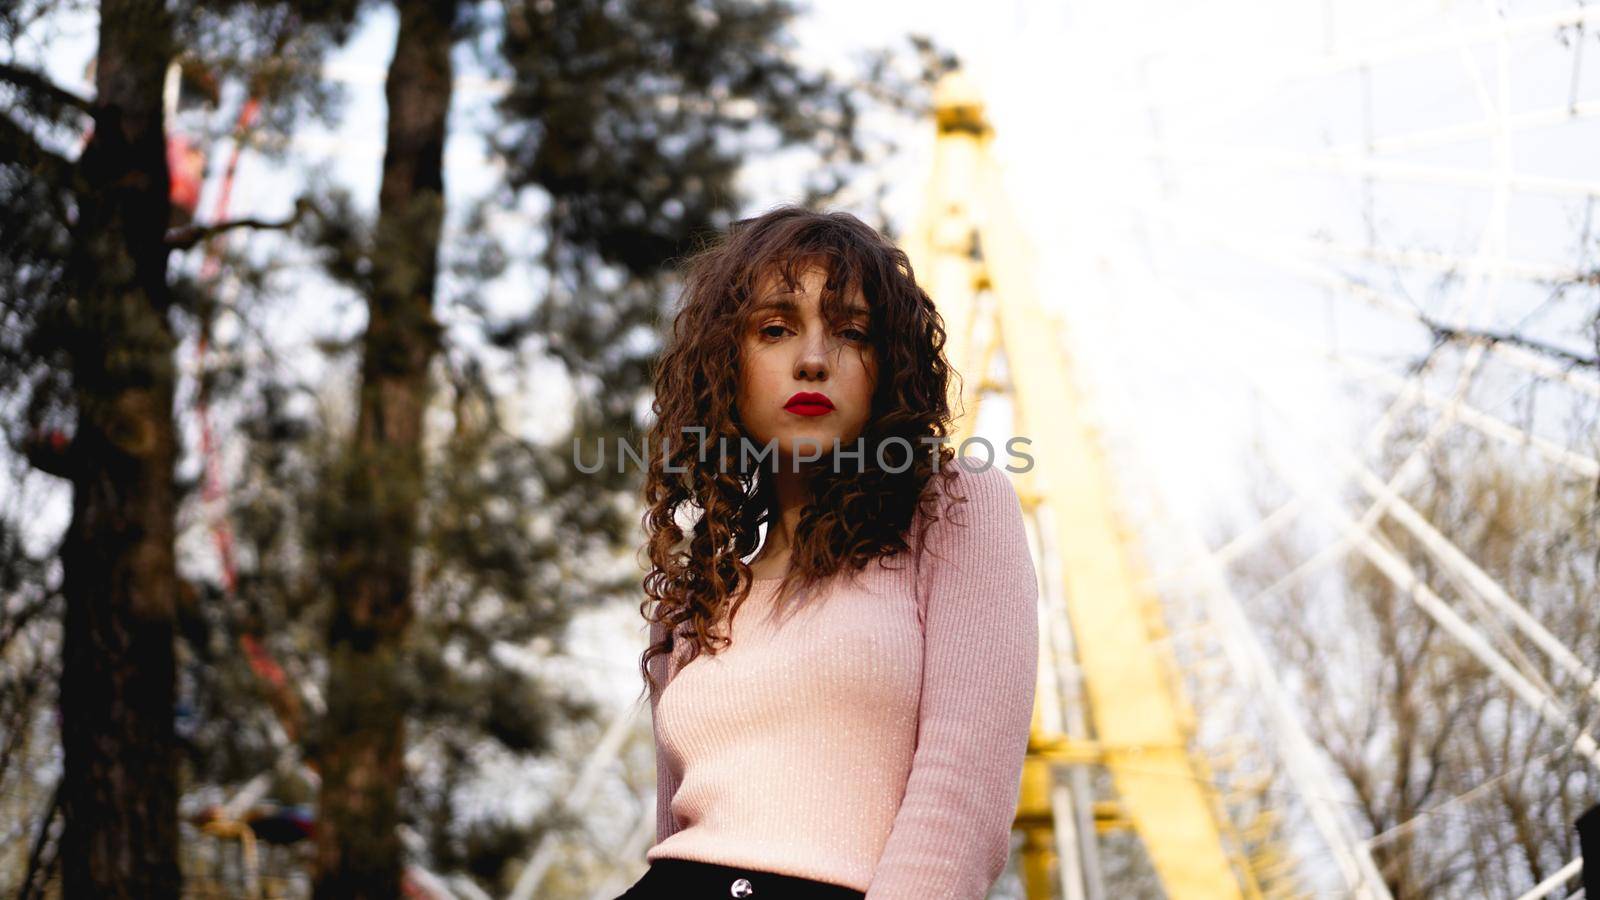 Women with long curly hair in the background of the Ferris wheel in sunny day